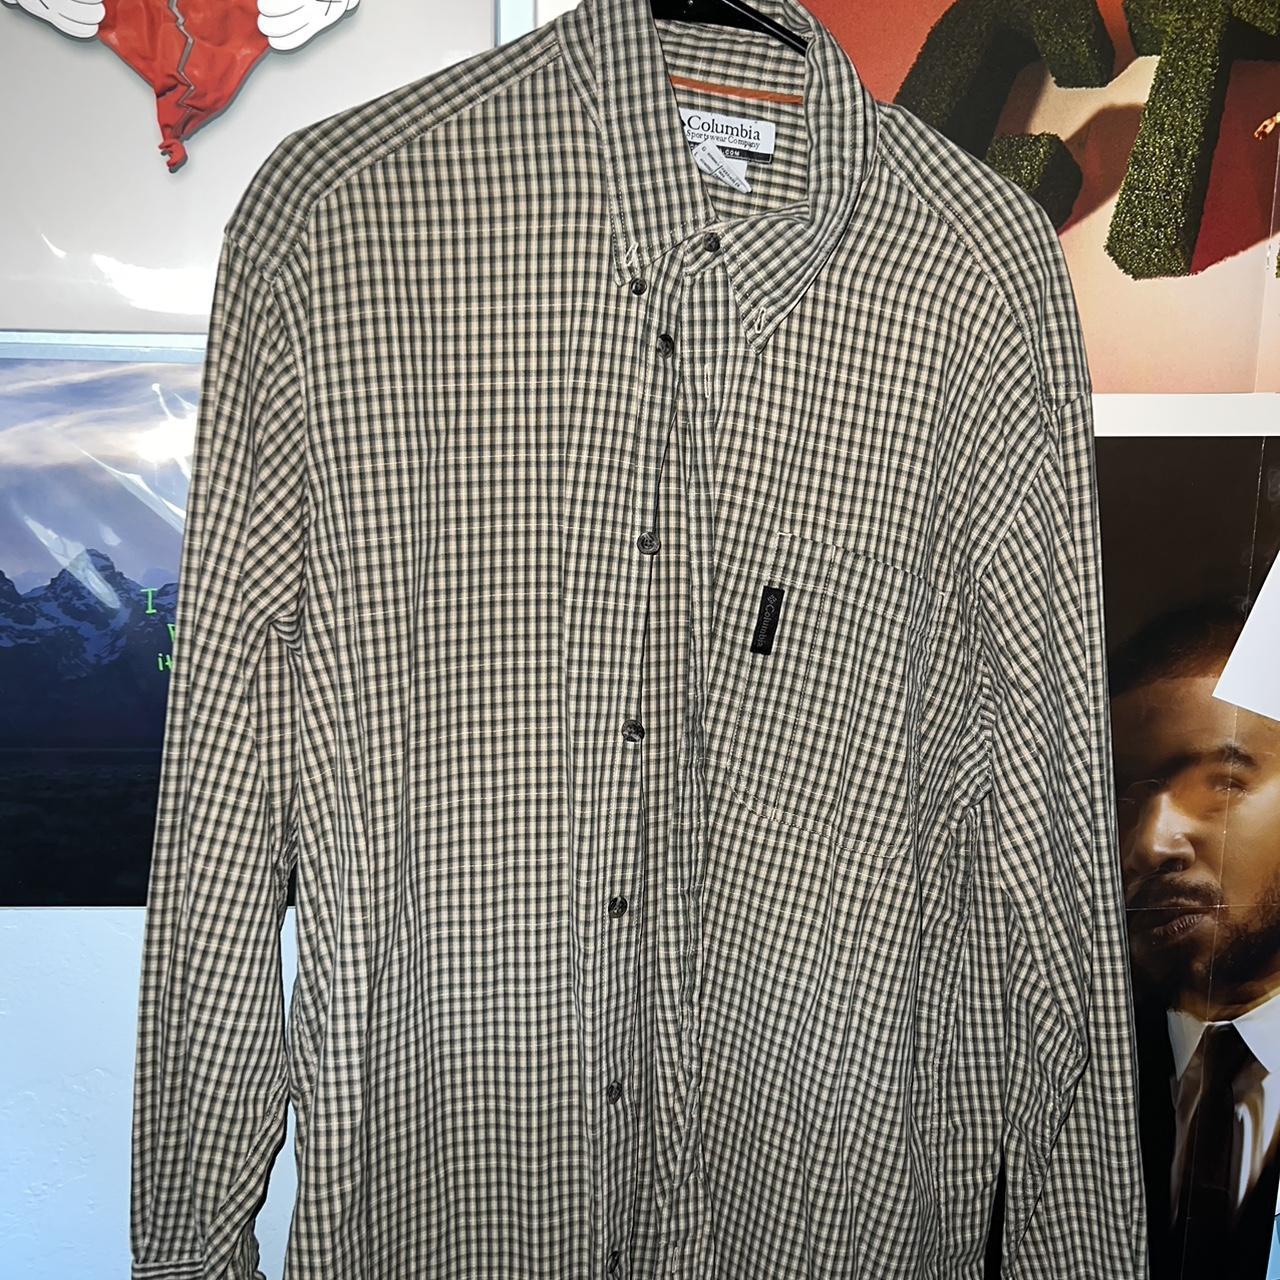 Columbia flannel/over shirt, Size large fits